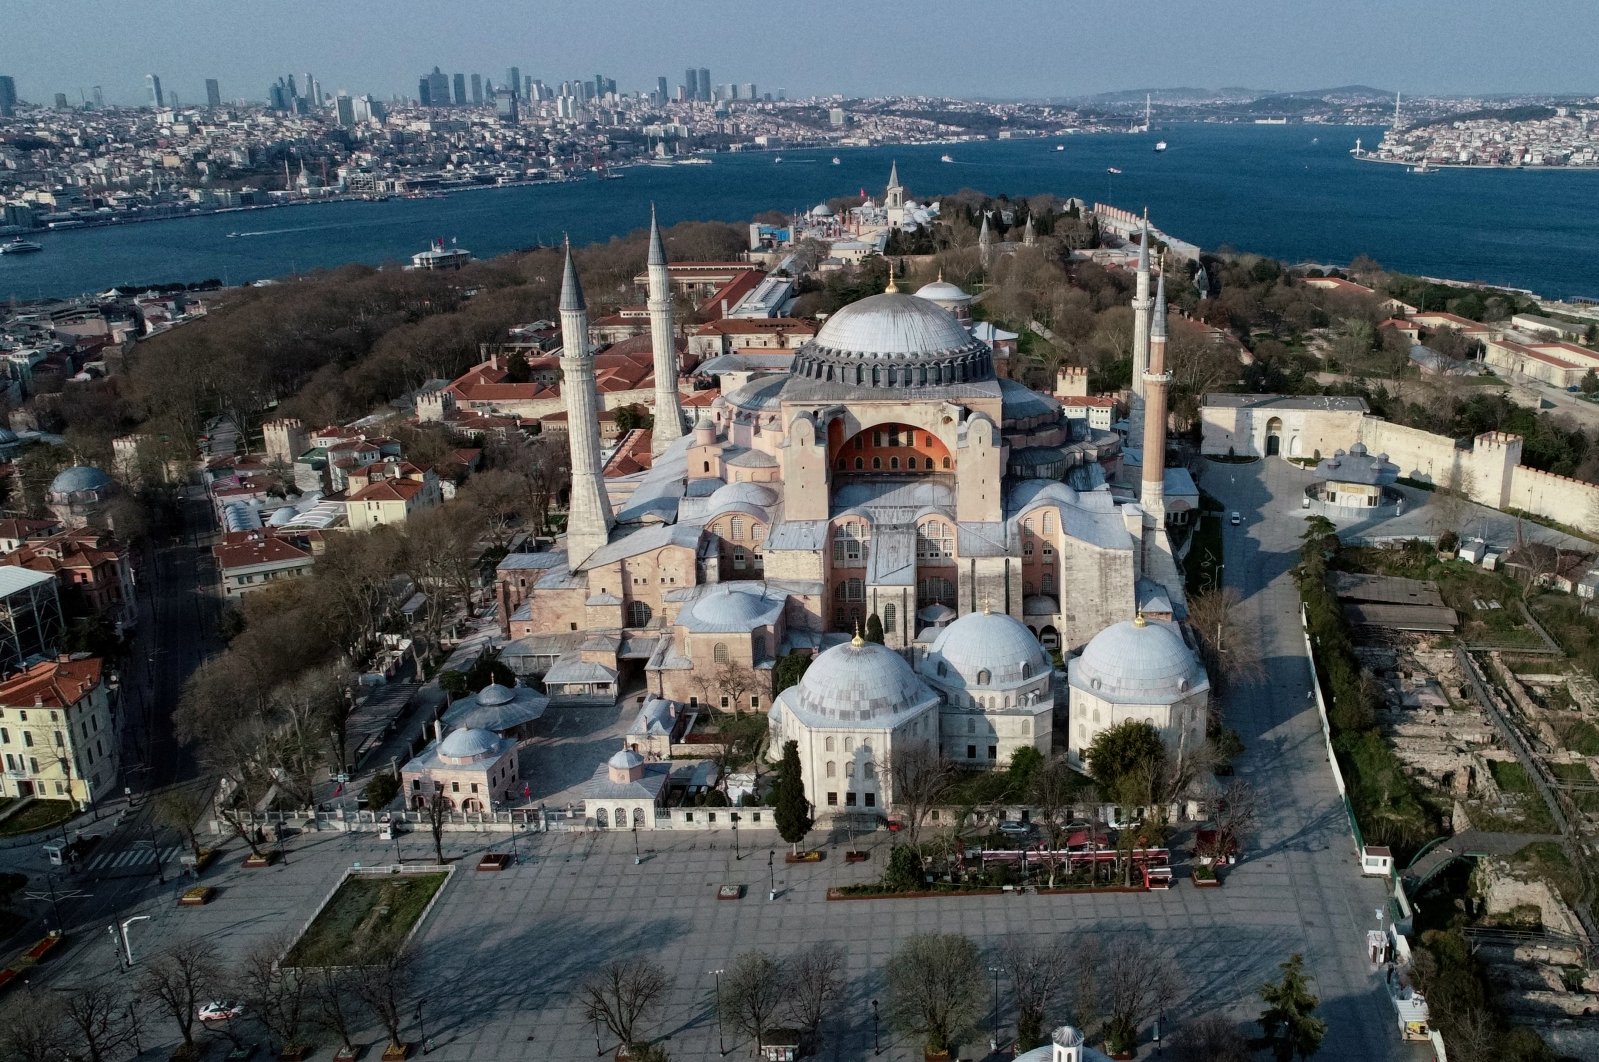 An aerial view of Hagia Sophia in Istanbul, Turkey, April 11, 2020. (REUTERS PHOTO)